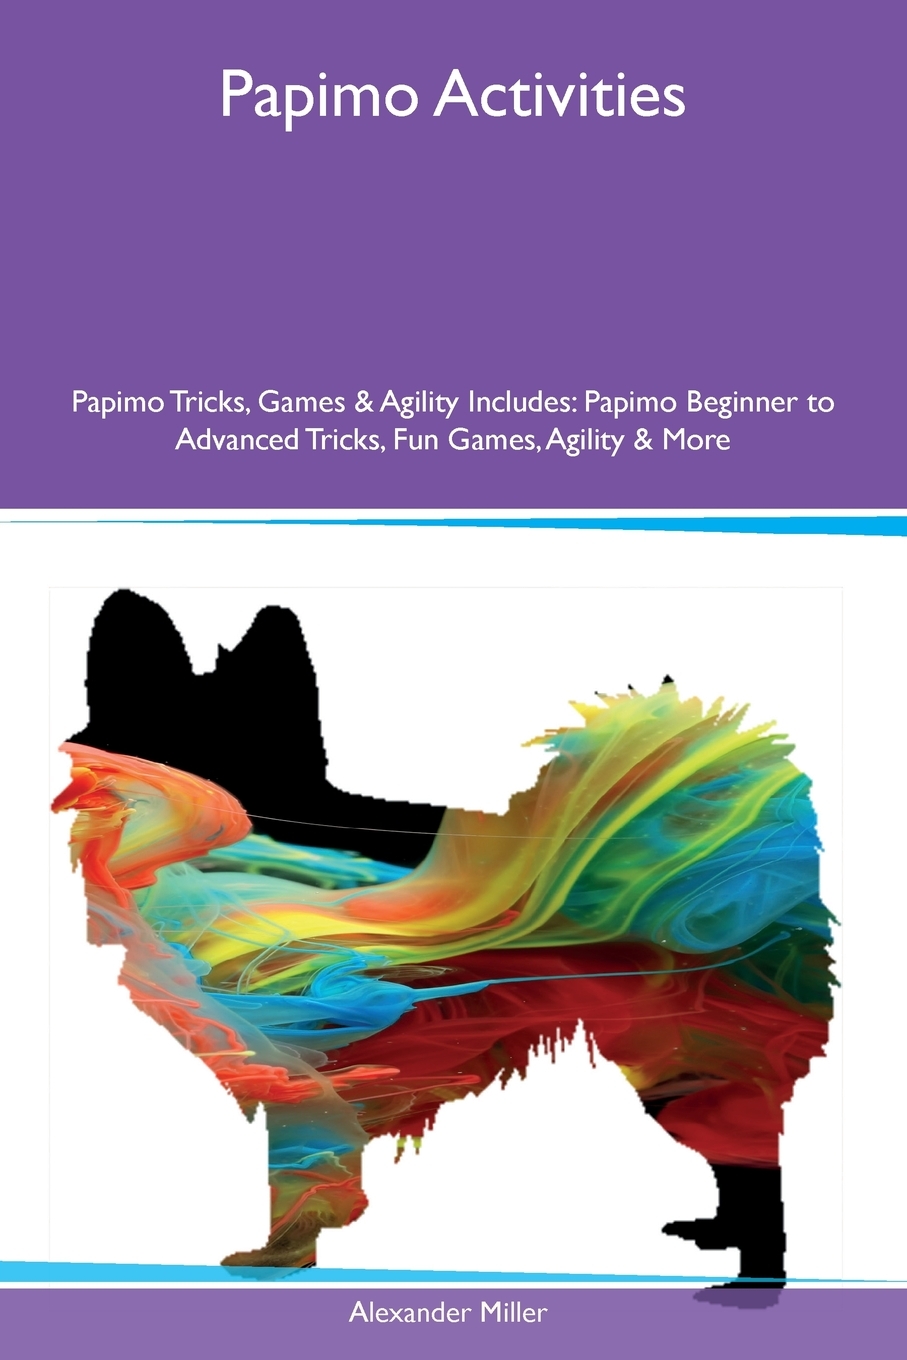 Papimo Activities Papimo Tricks, Games & Agility Includes : Papimo Beginner  to Advanced Tricks, Fun Games, Agility & More